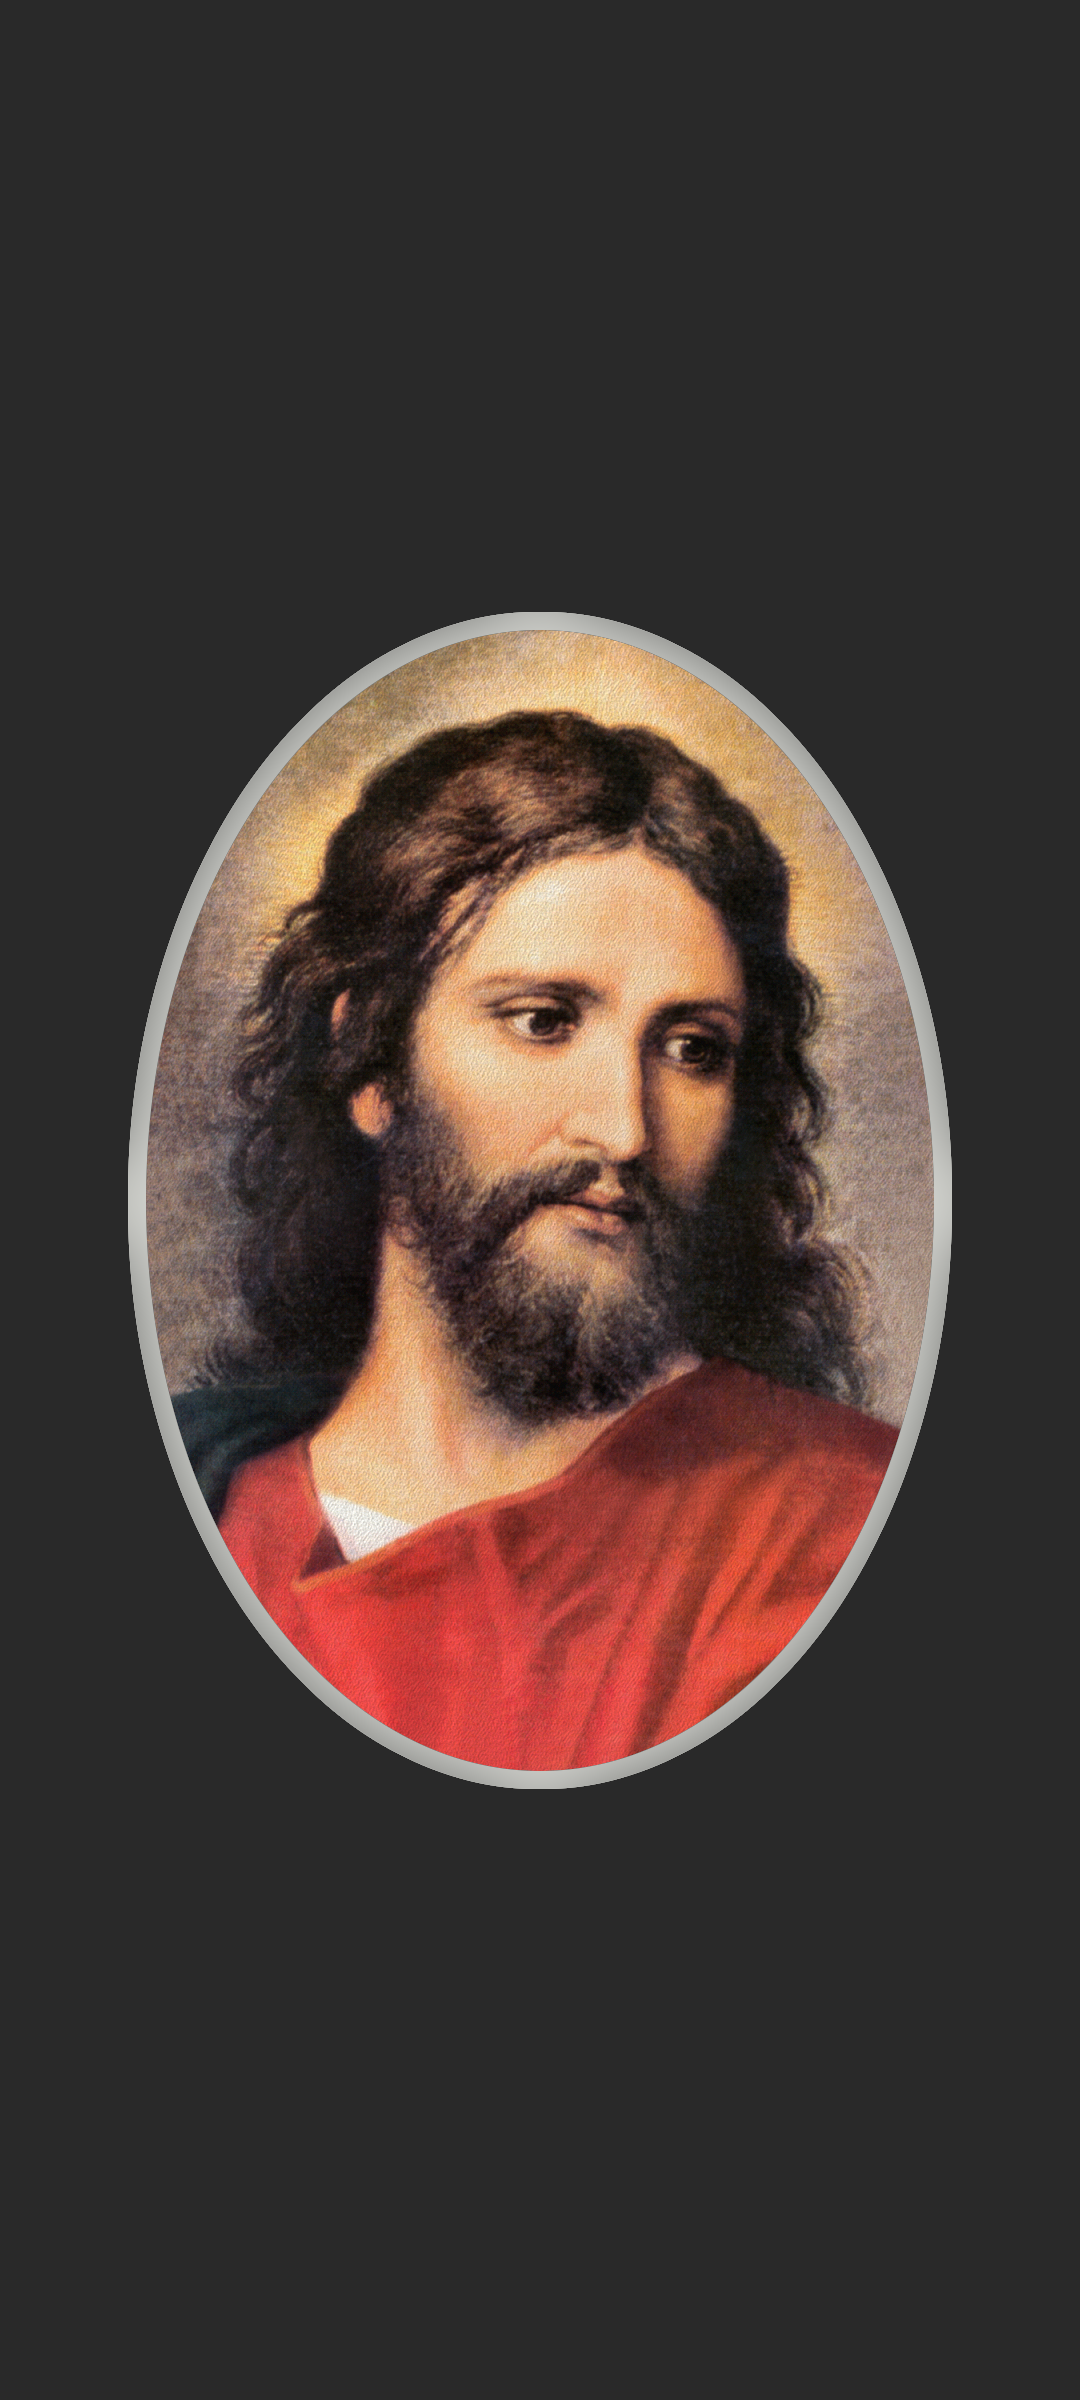 Jesus Christ Christianity Religion Religious Picture In Picture Classic Art 1080x2400